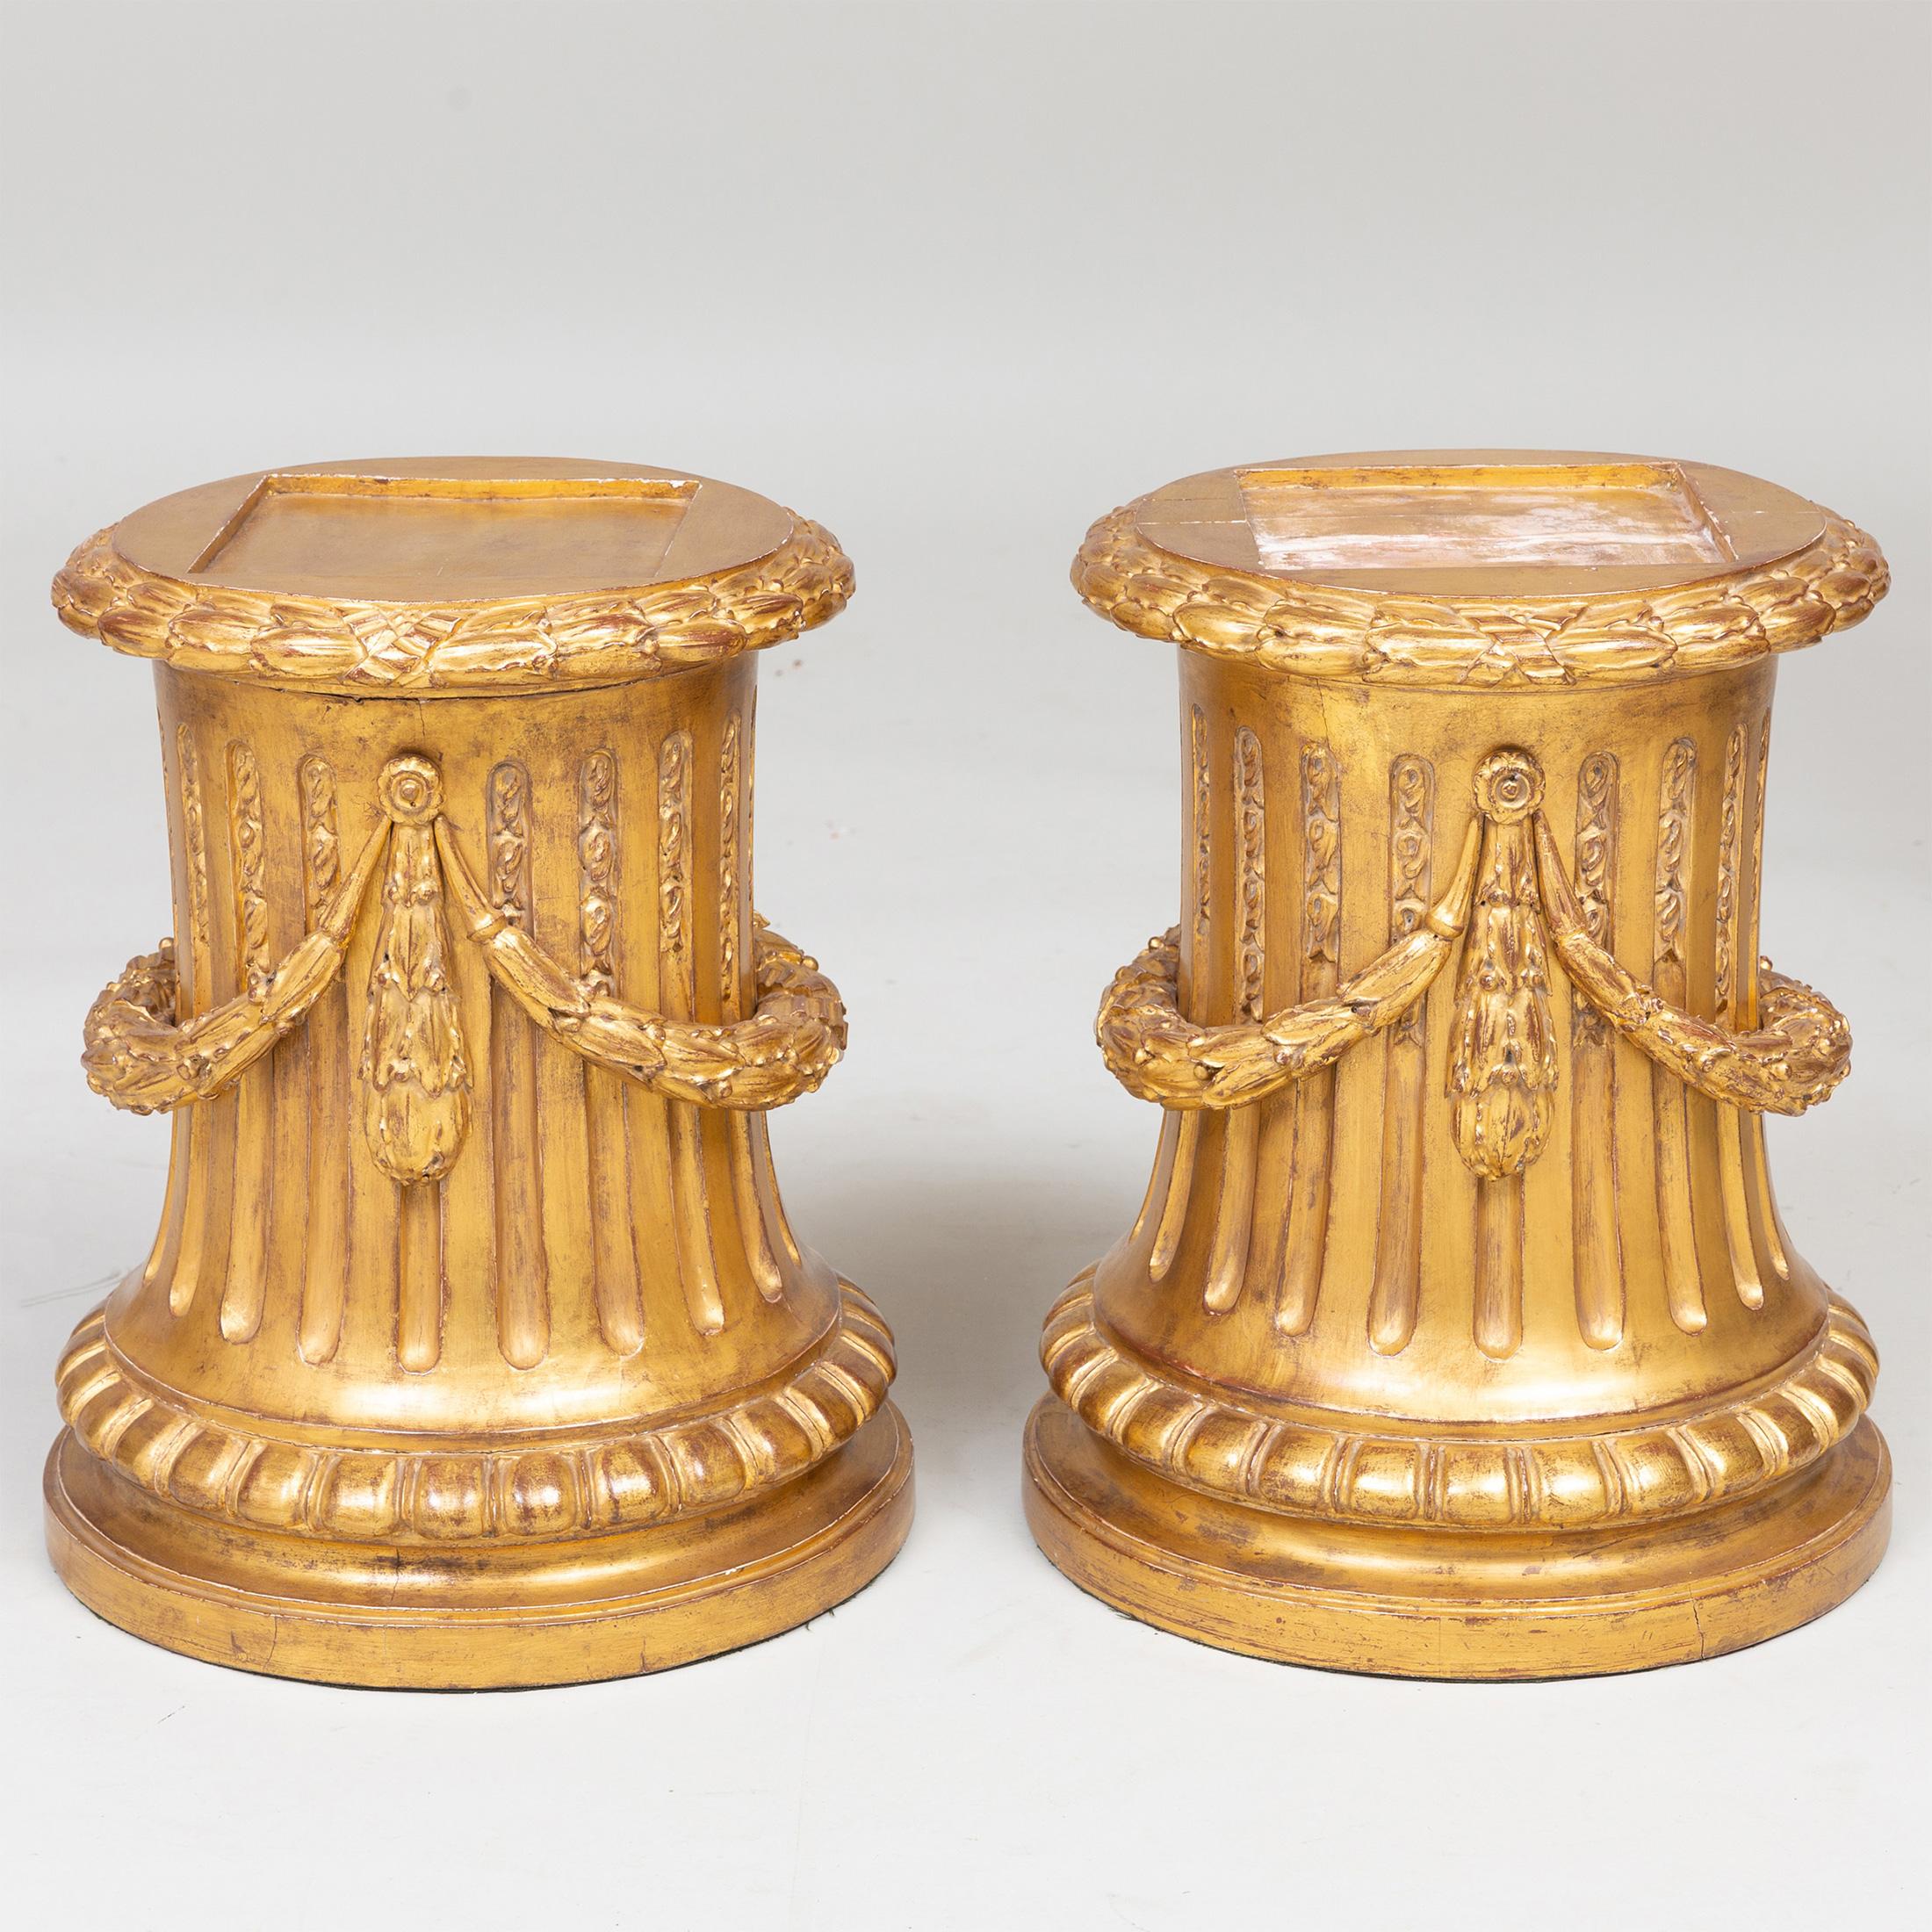 19th Century Pair of French Louis XVI Style Giltwood Footed Plinths